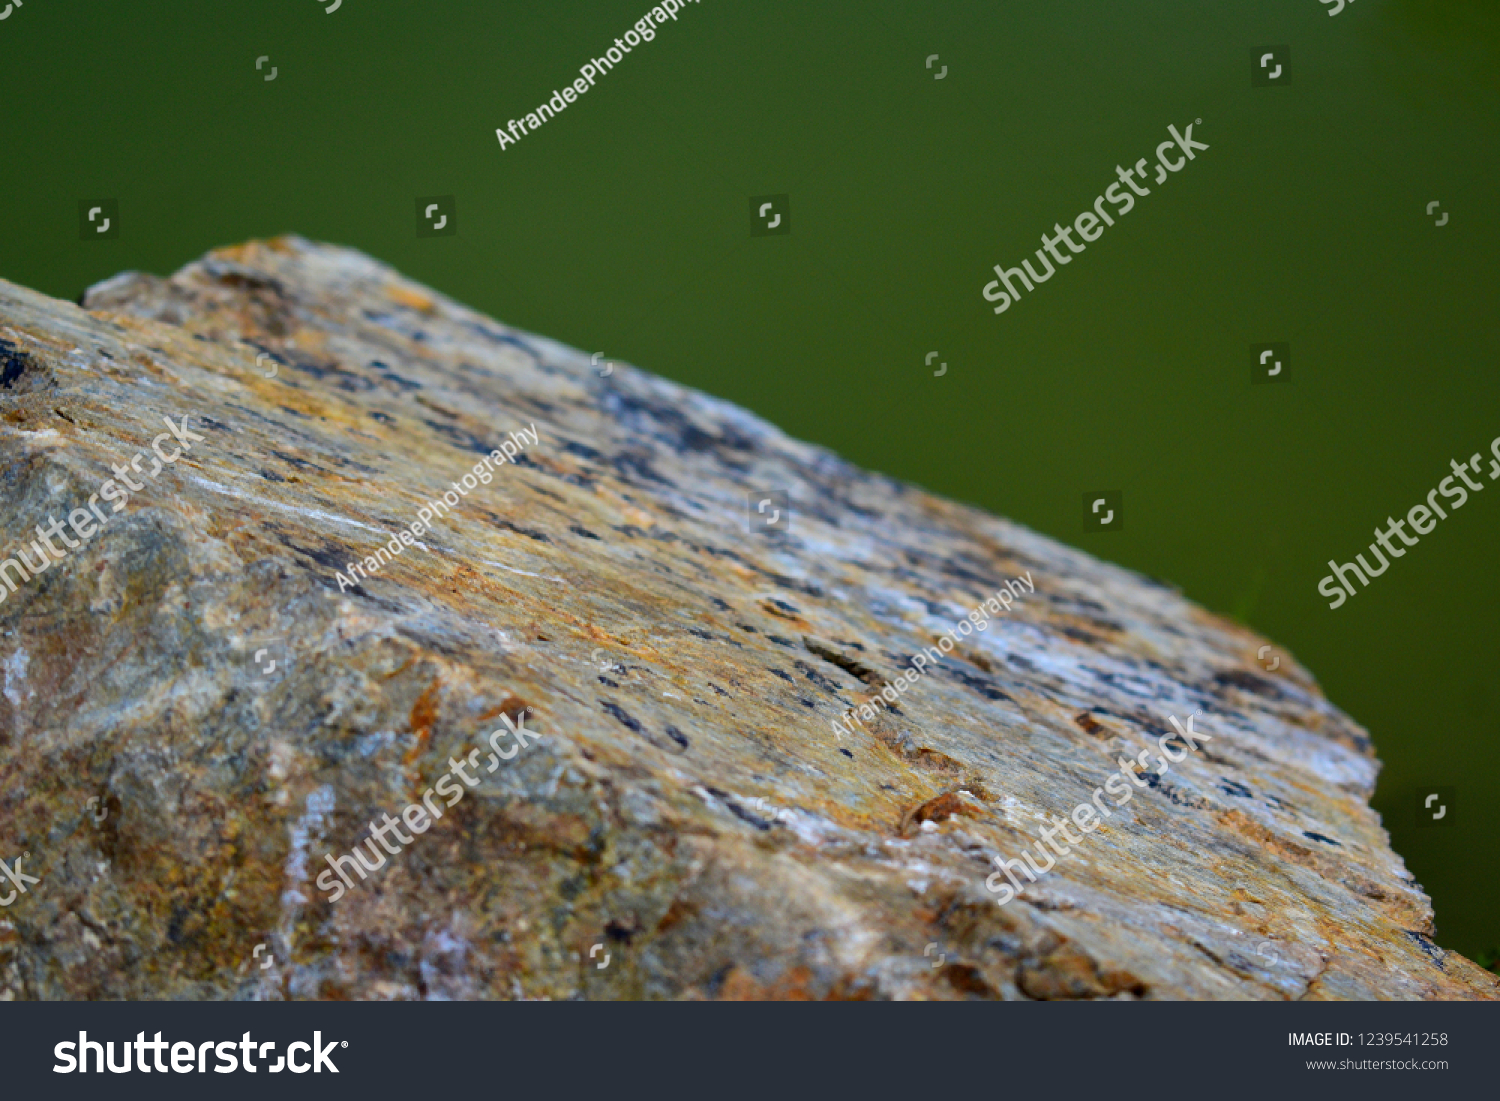 surface on stone with green blur background #1239541258